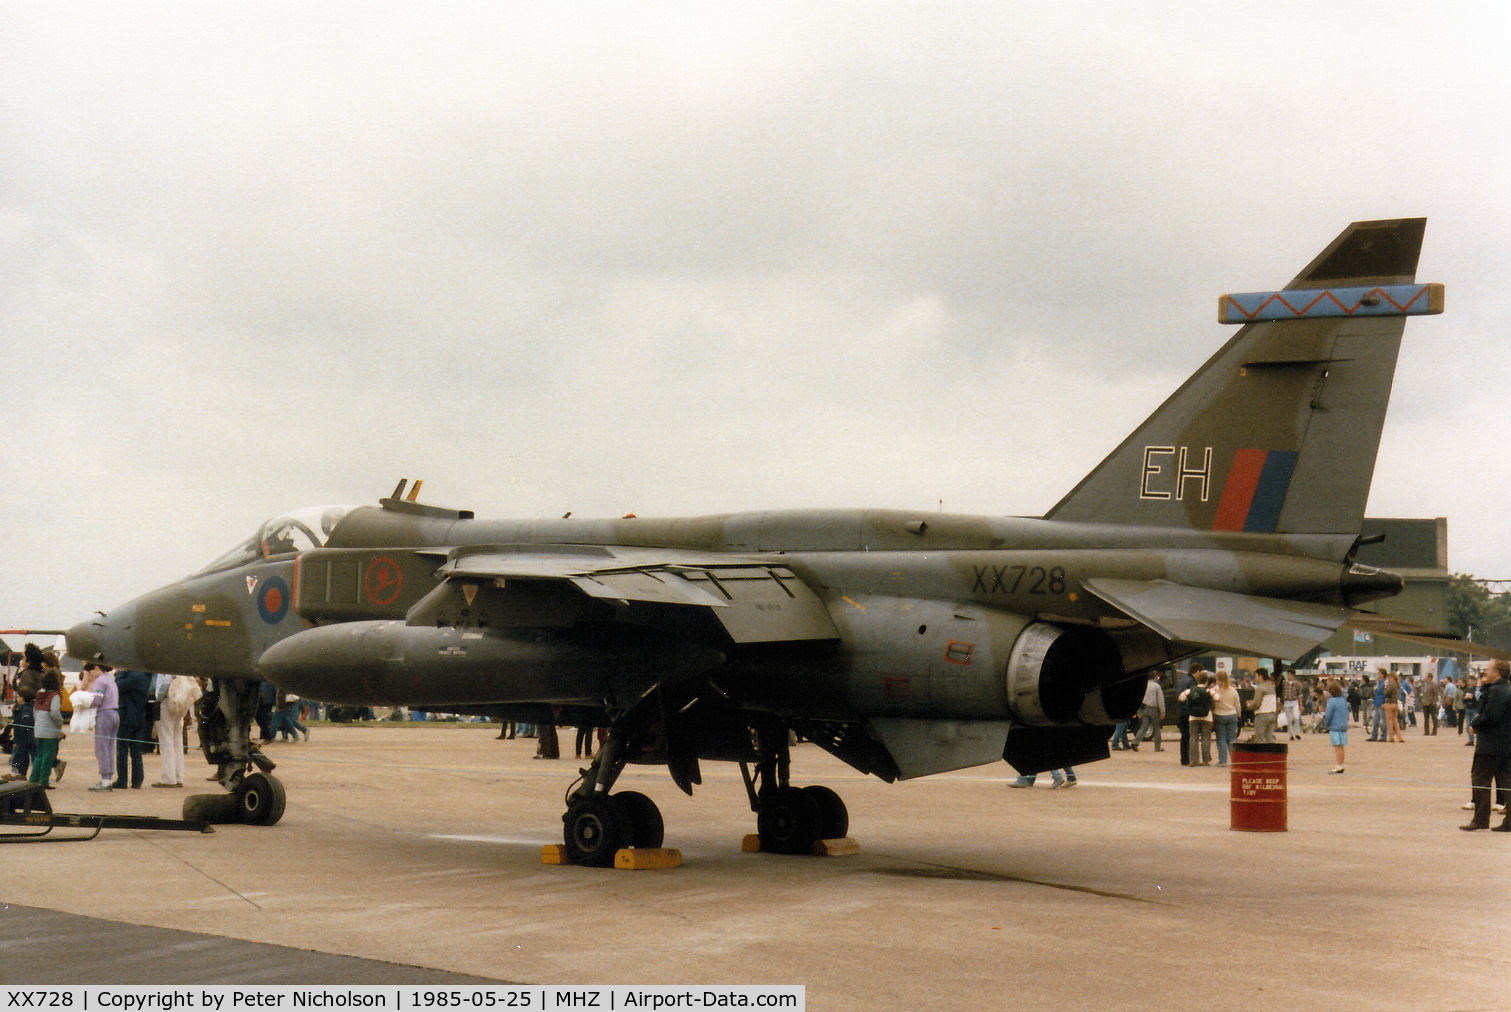 XX728, 1974 Sepecat Jaguar GR.1 C/N S.25, Jaguar GR.1 of 6 Squadron at RAF Coltishall on display at the 1985 RAF Mildenhall Air Fete. Sadly, this aircraft was lost in a mid-air collision five months later.